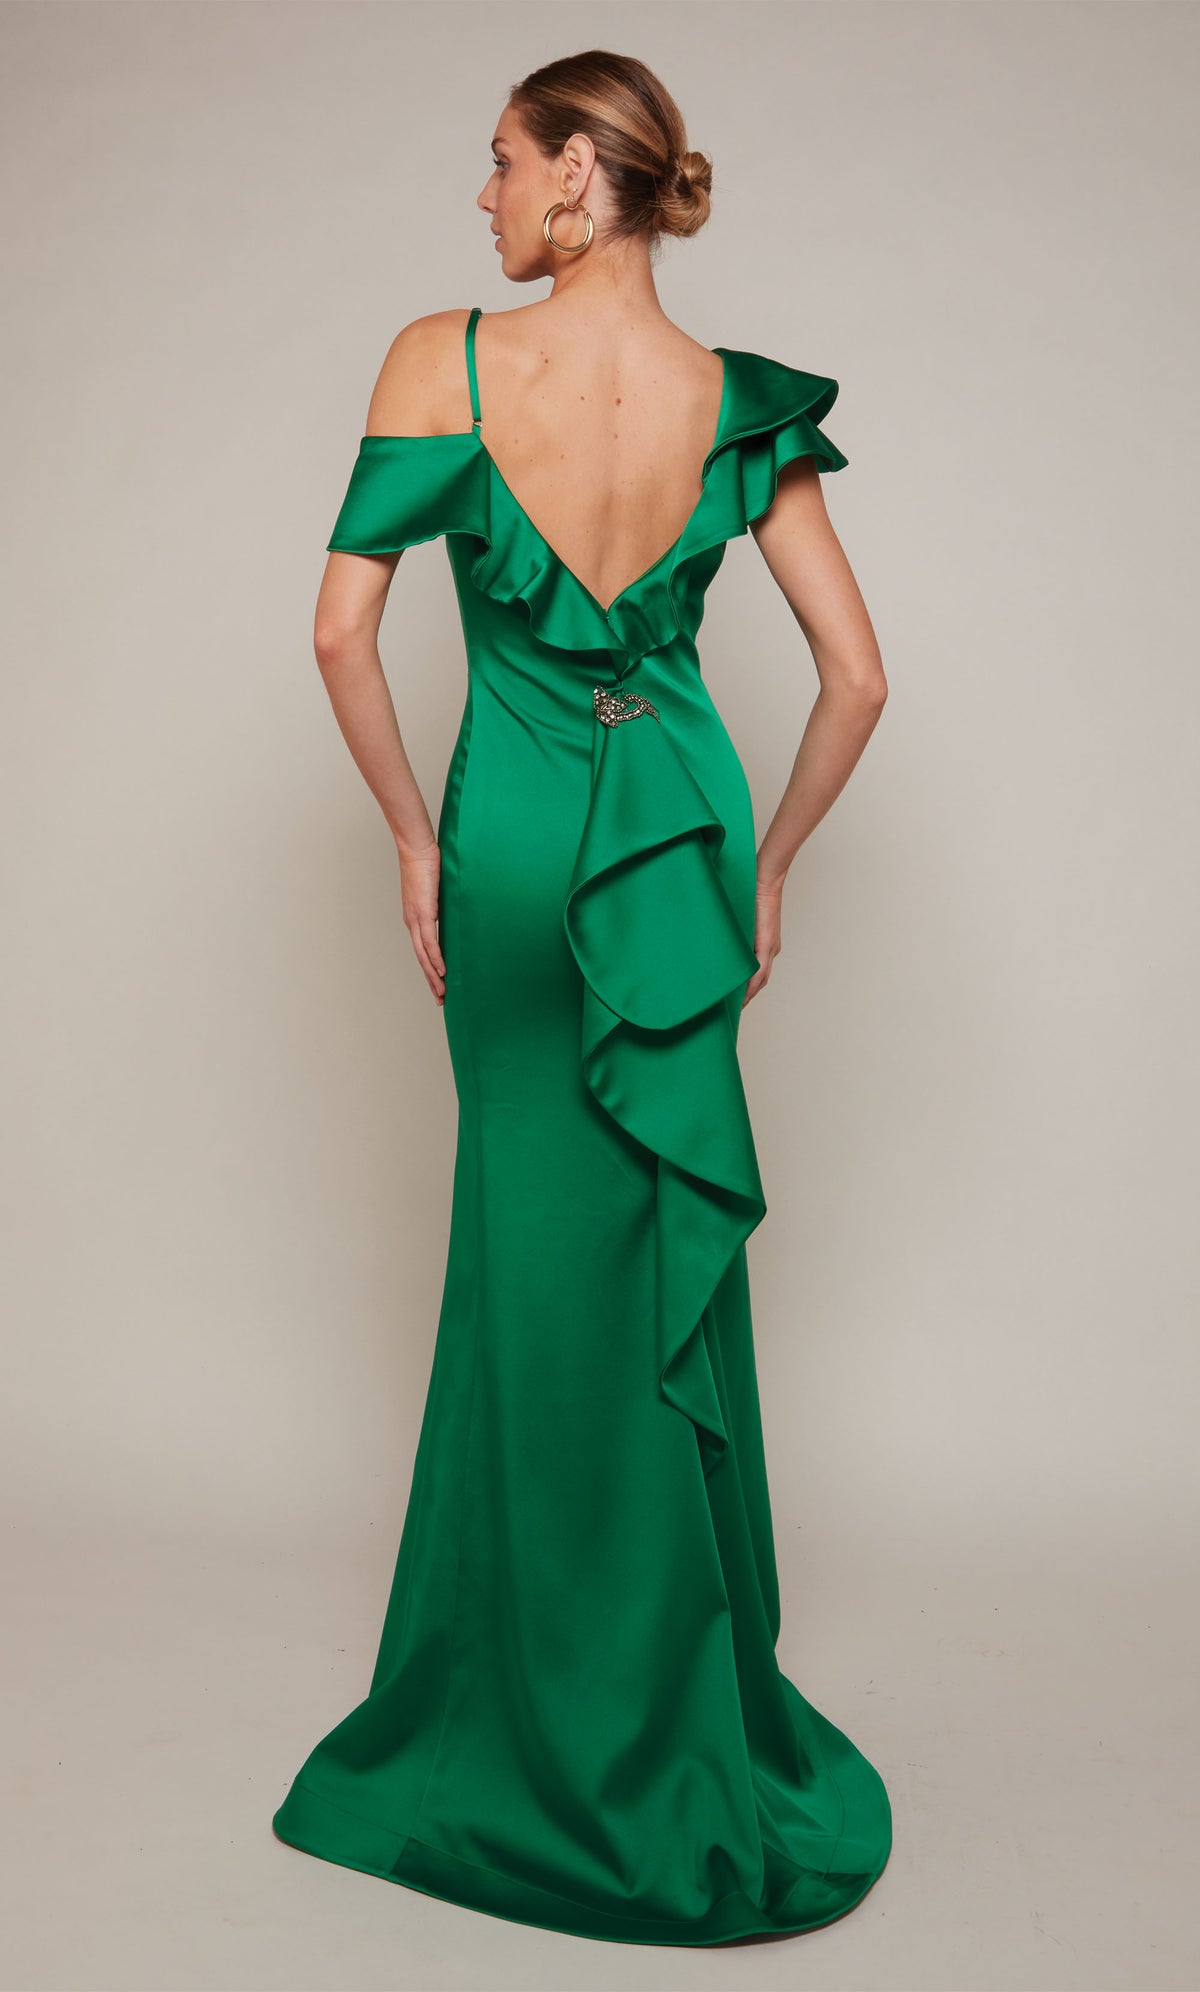 A satin formal dress featuring a one shoulder neckline, a fitted silhouette, and ruffles in emerald green.